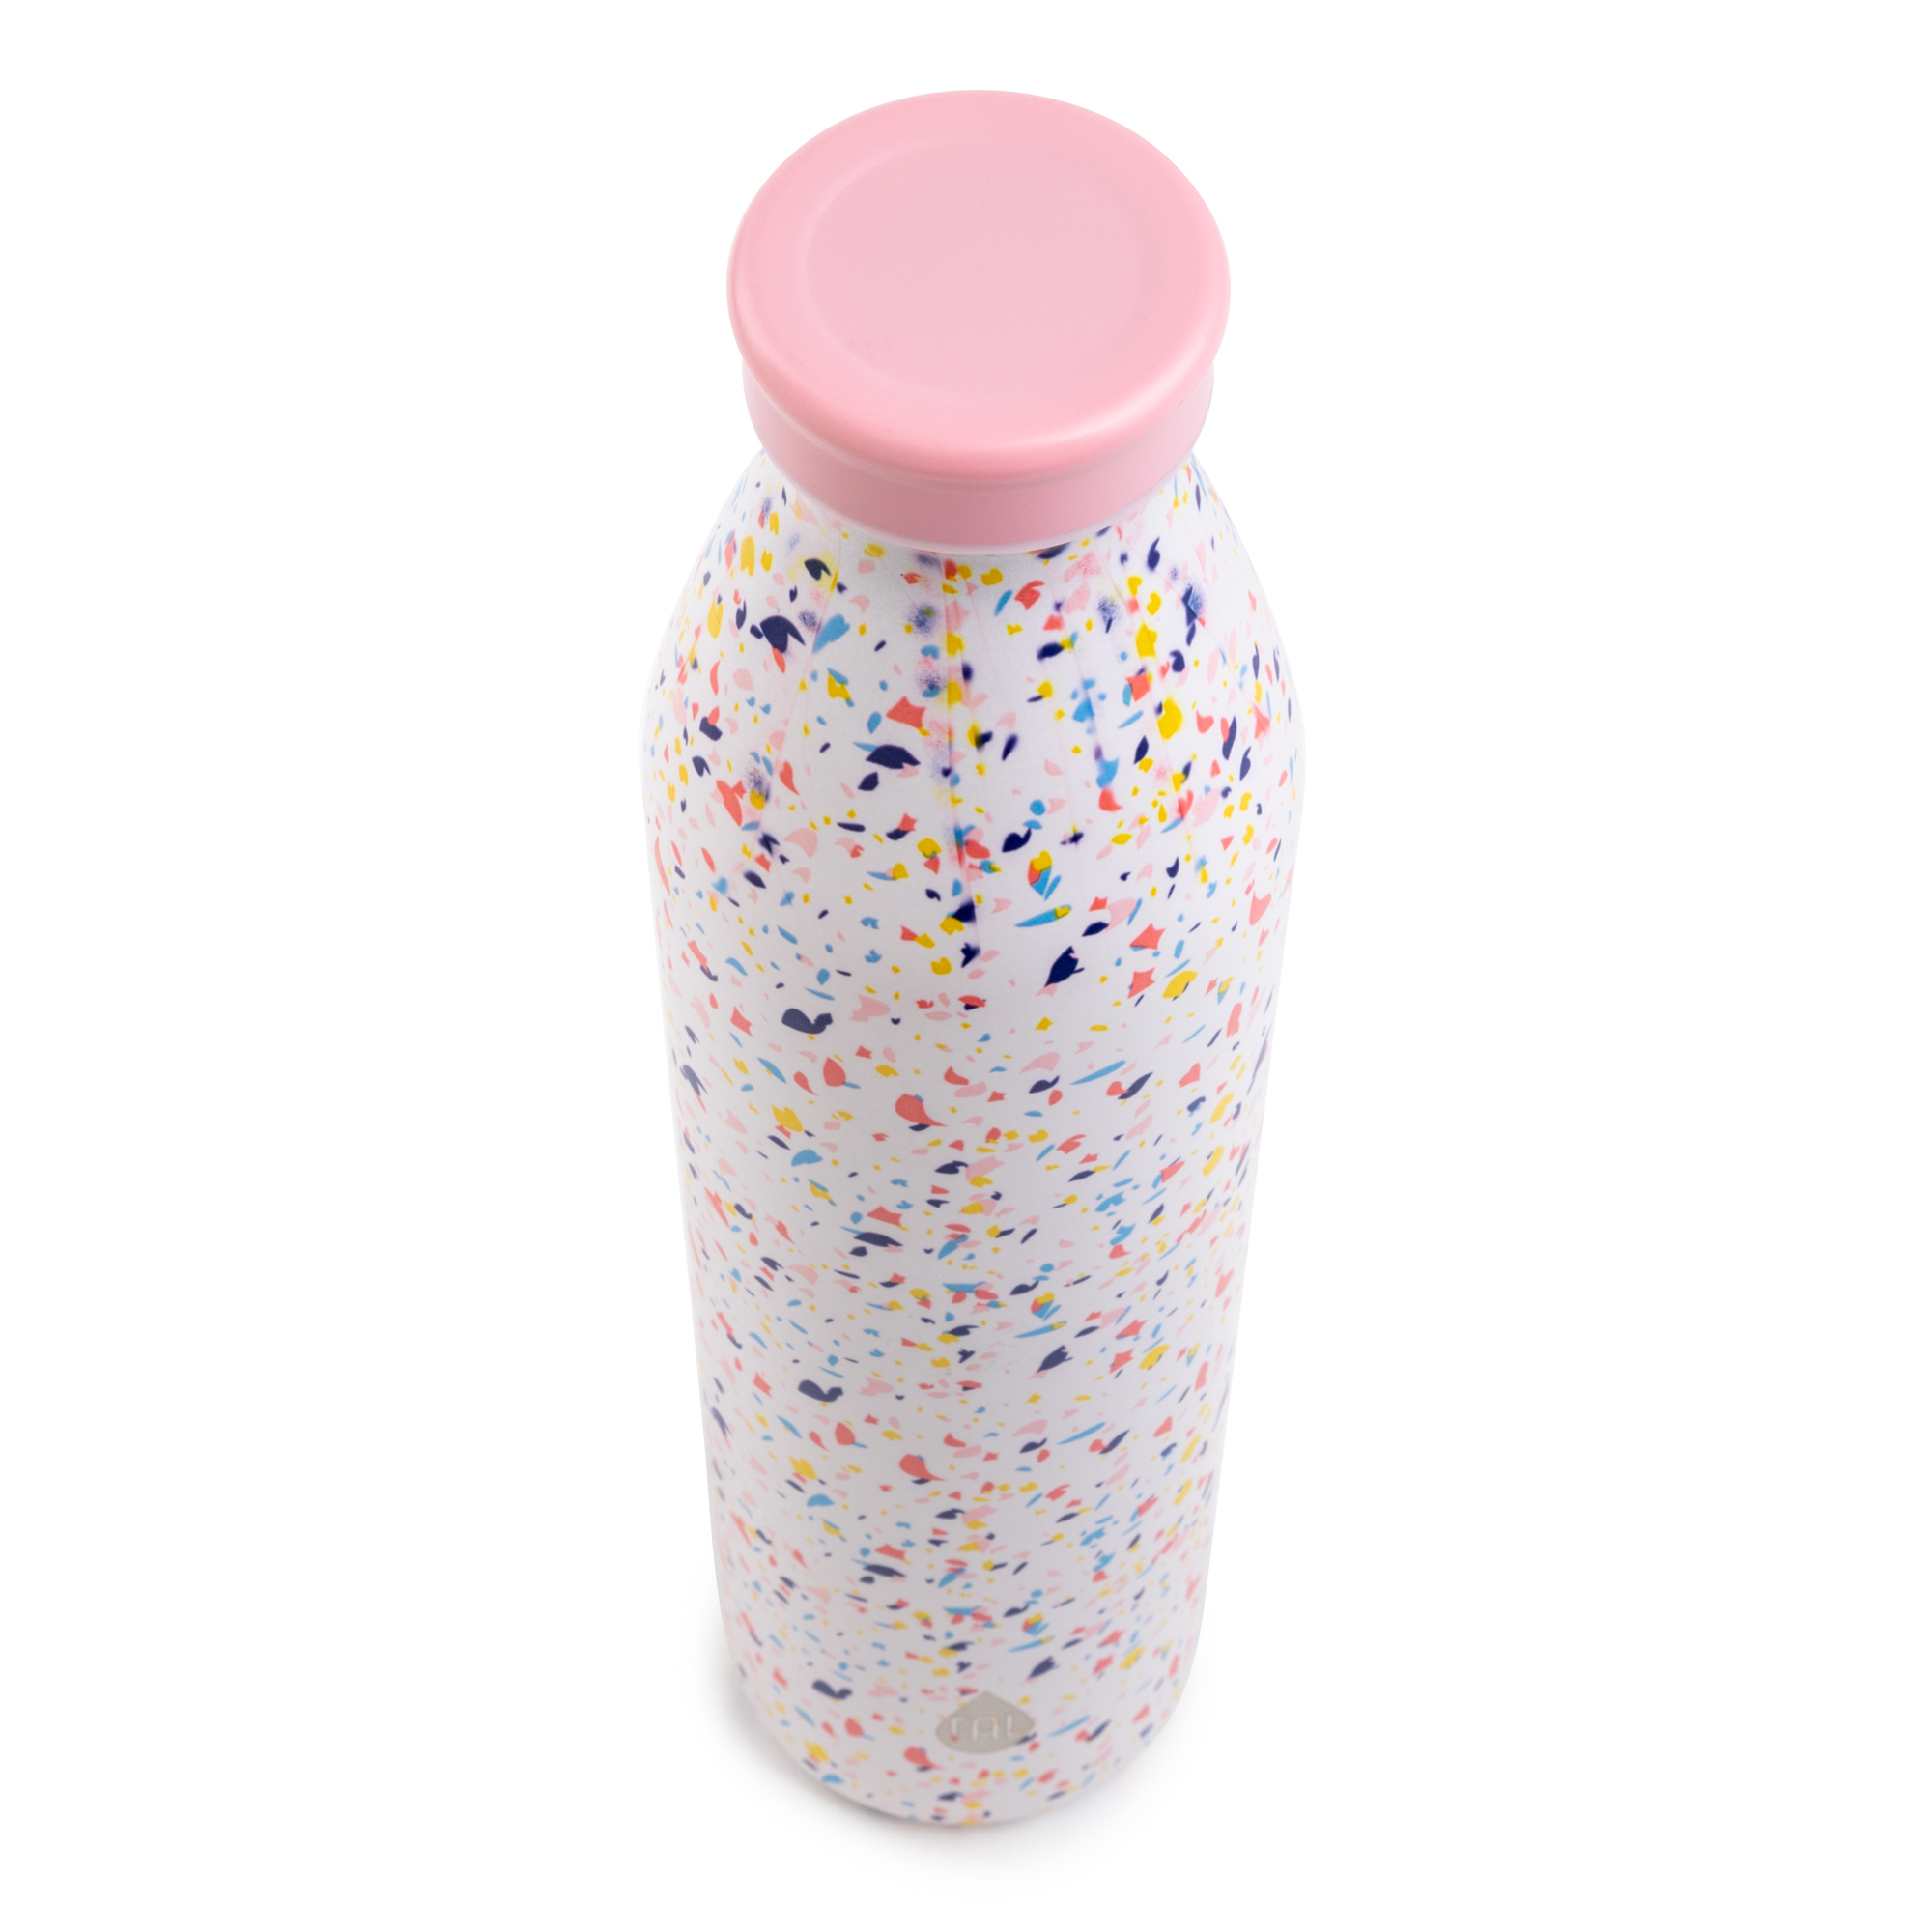 TAL Stainless Steel Water Bottle, 20 fluid ounces, Confetti - image 3 of 5